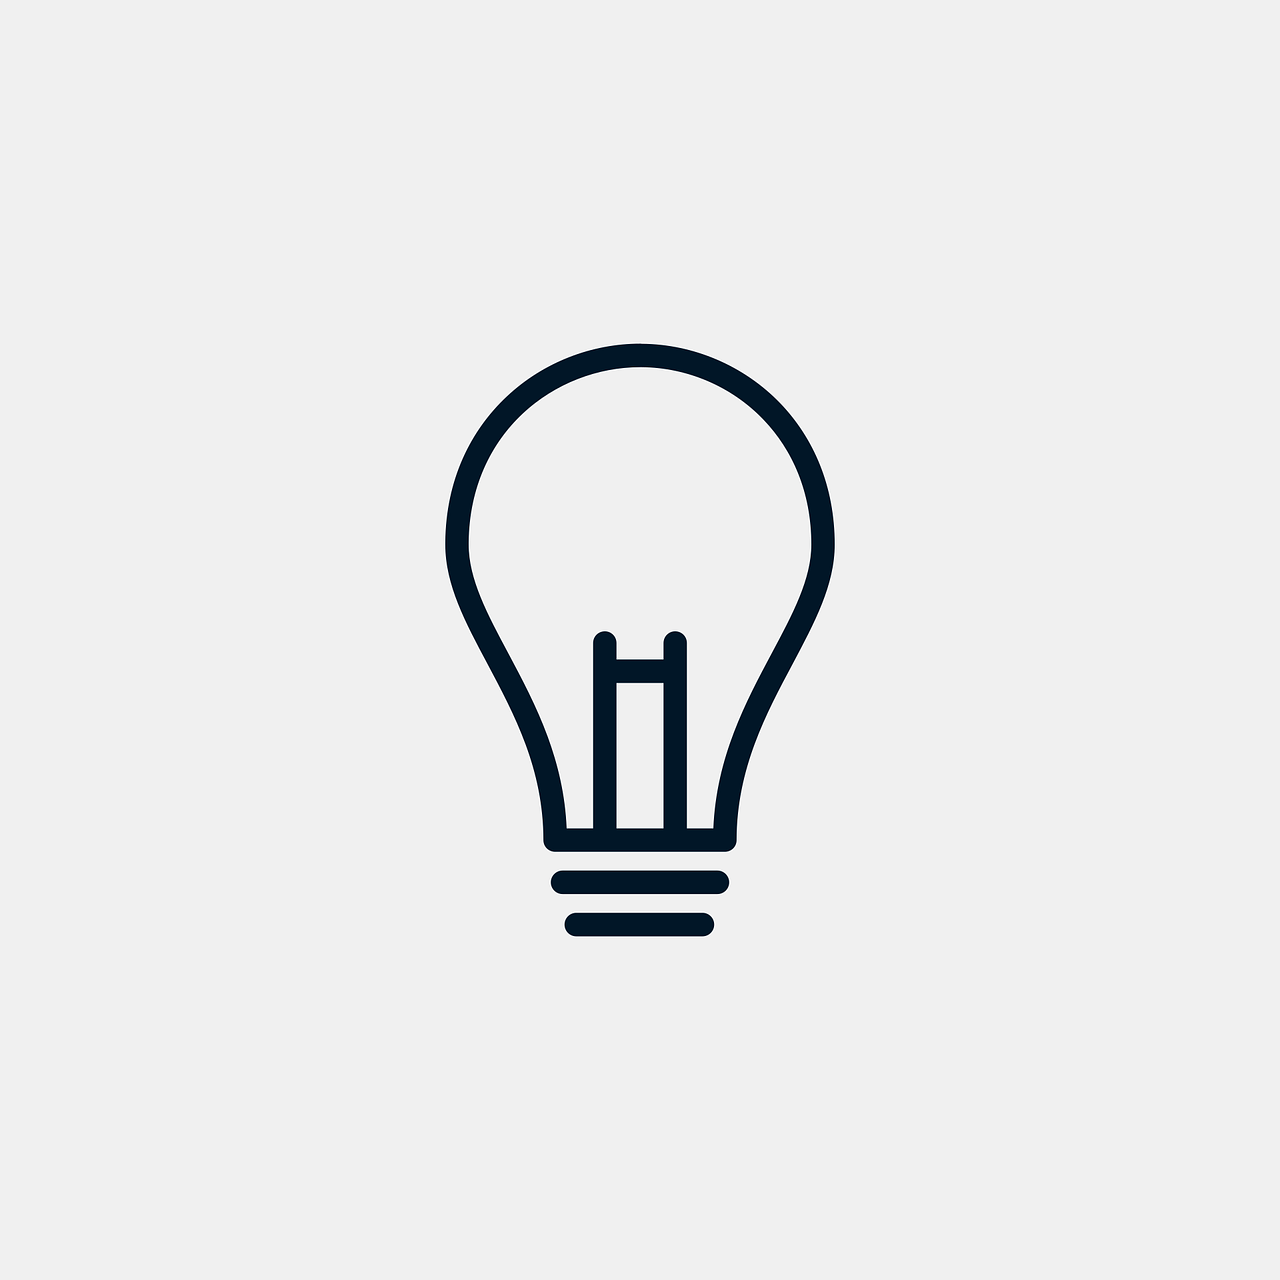 a black and white photo of a light bulb, a stock photo, minimalism, flat icon, navy, thin linework, simple and clean illustration